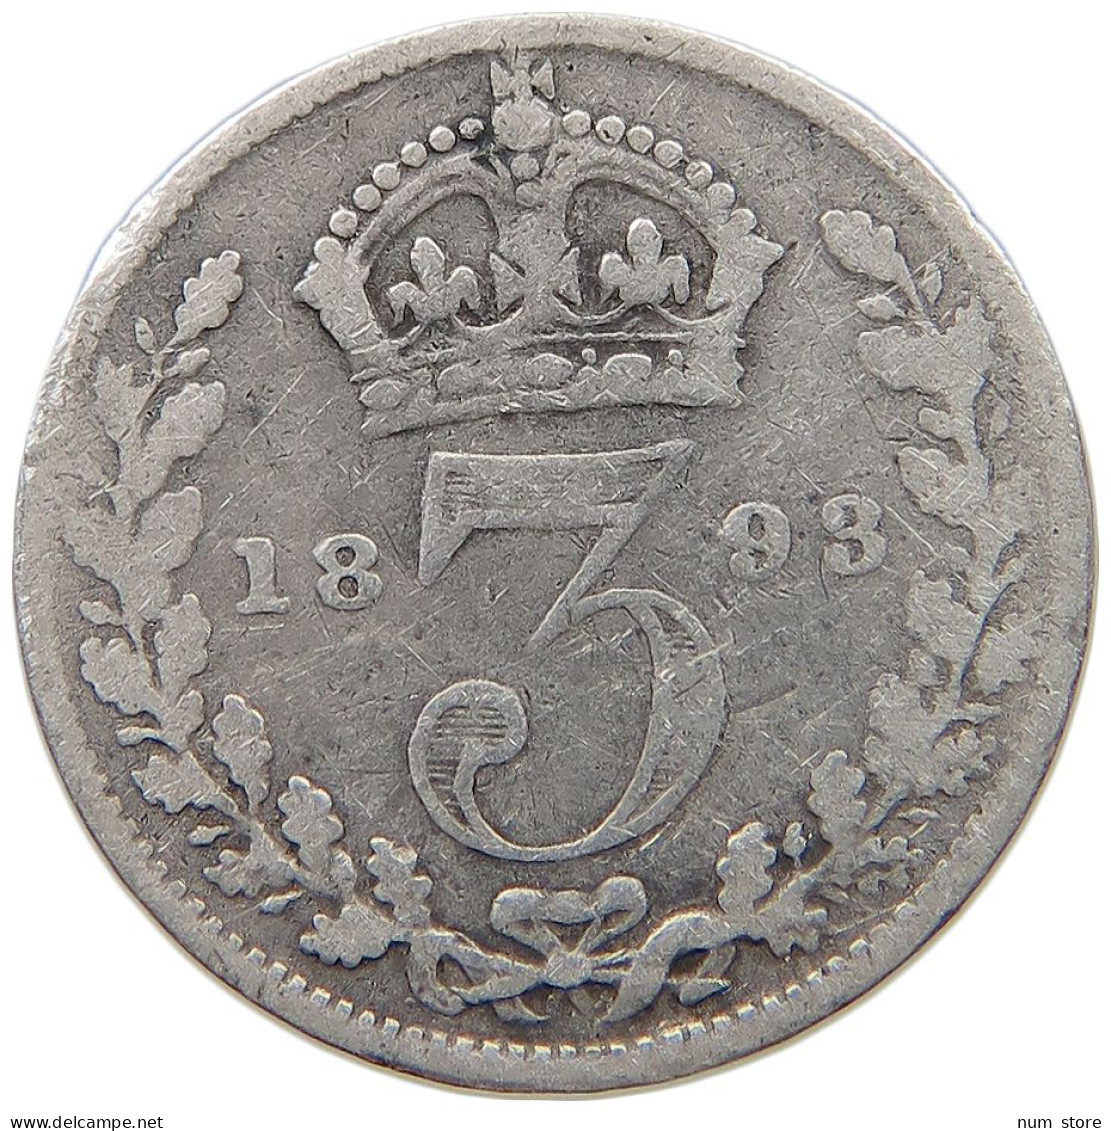 GREAT BRITAIN THREEPENCE 1893 #s059 0559 - F. 3 Pence